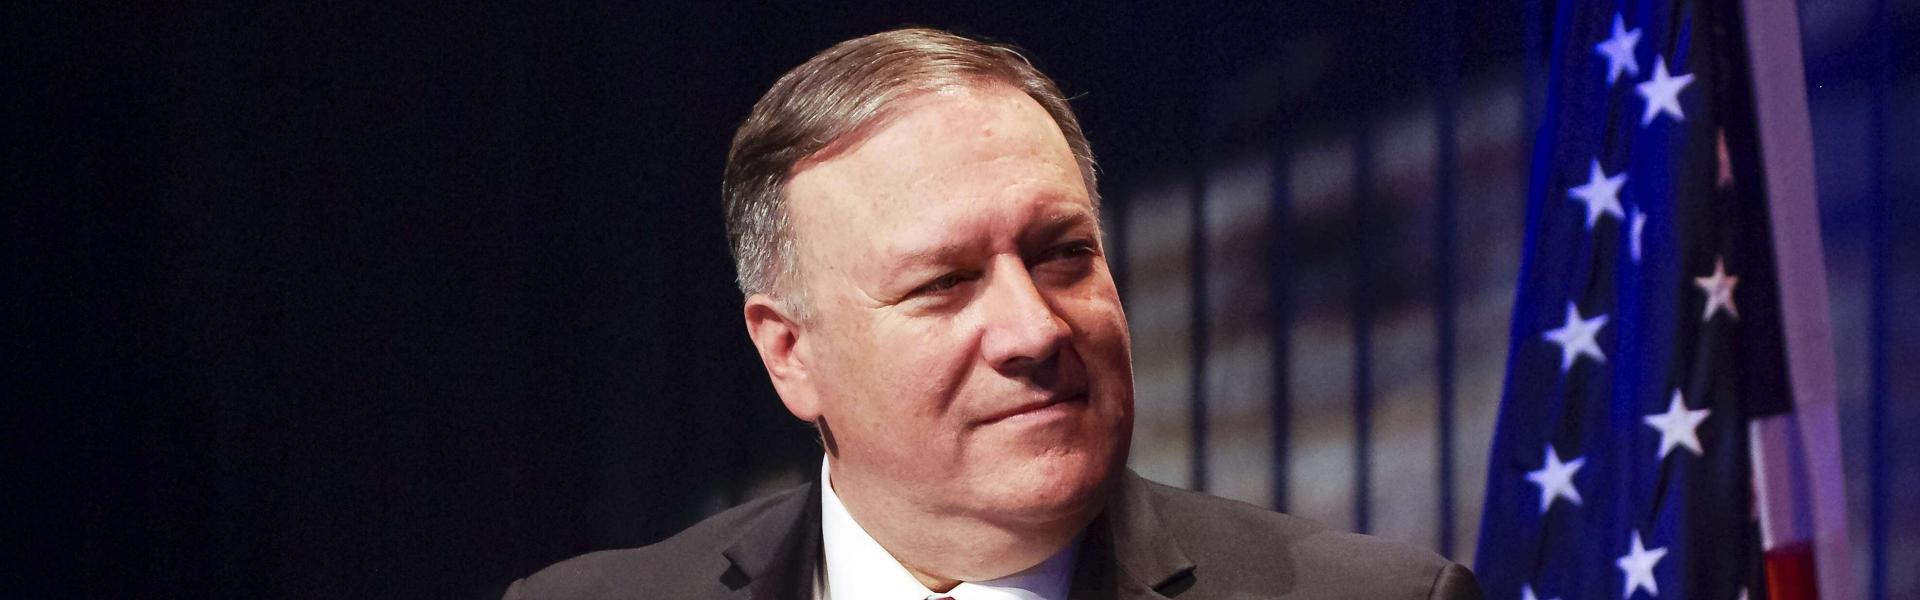 There will be a price for a Turkish attack on Kurds, says Pompeo 2